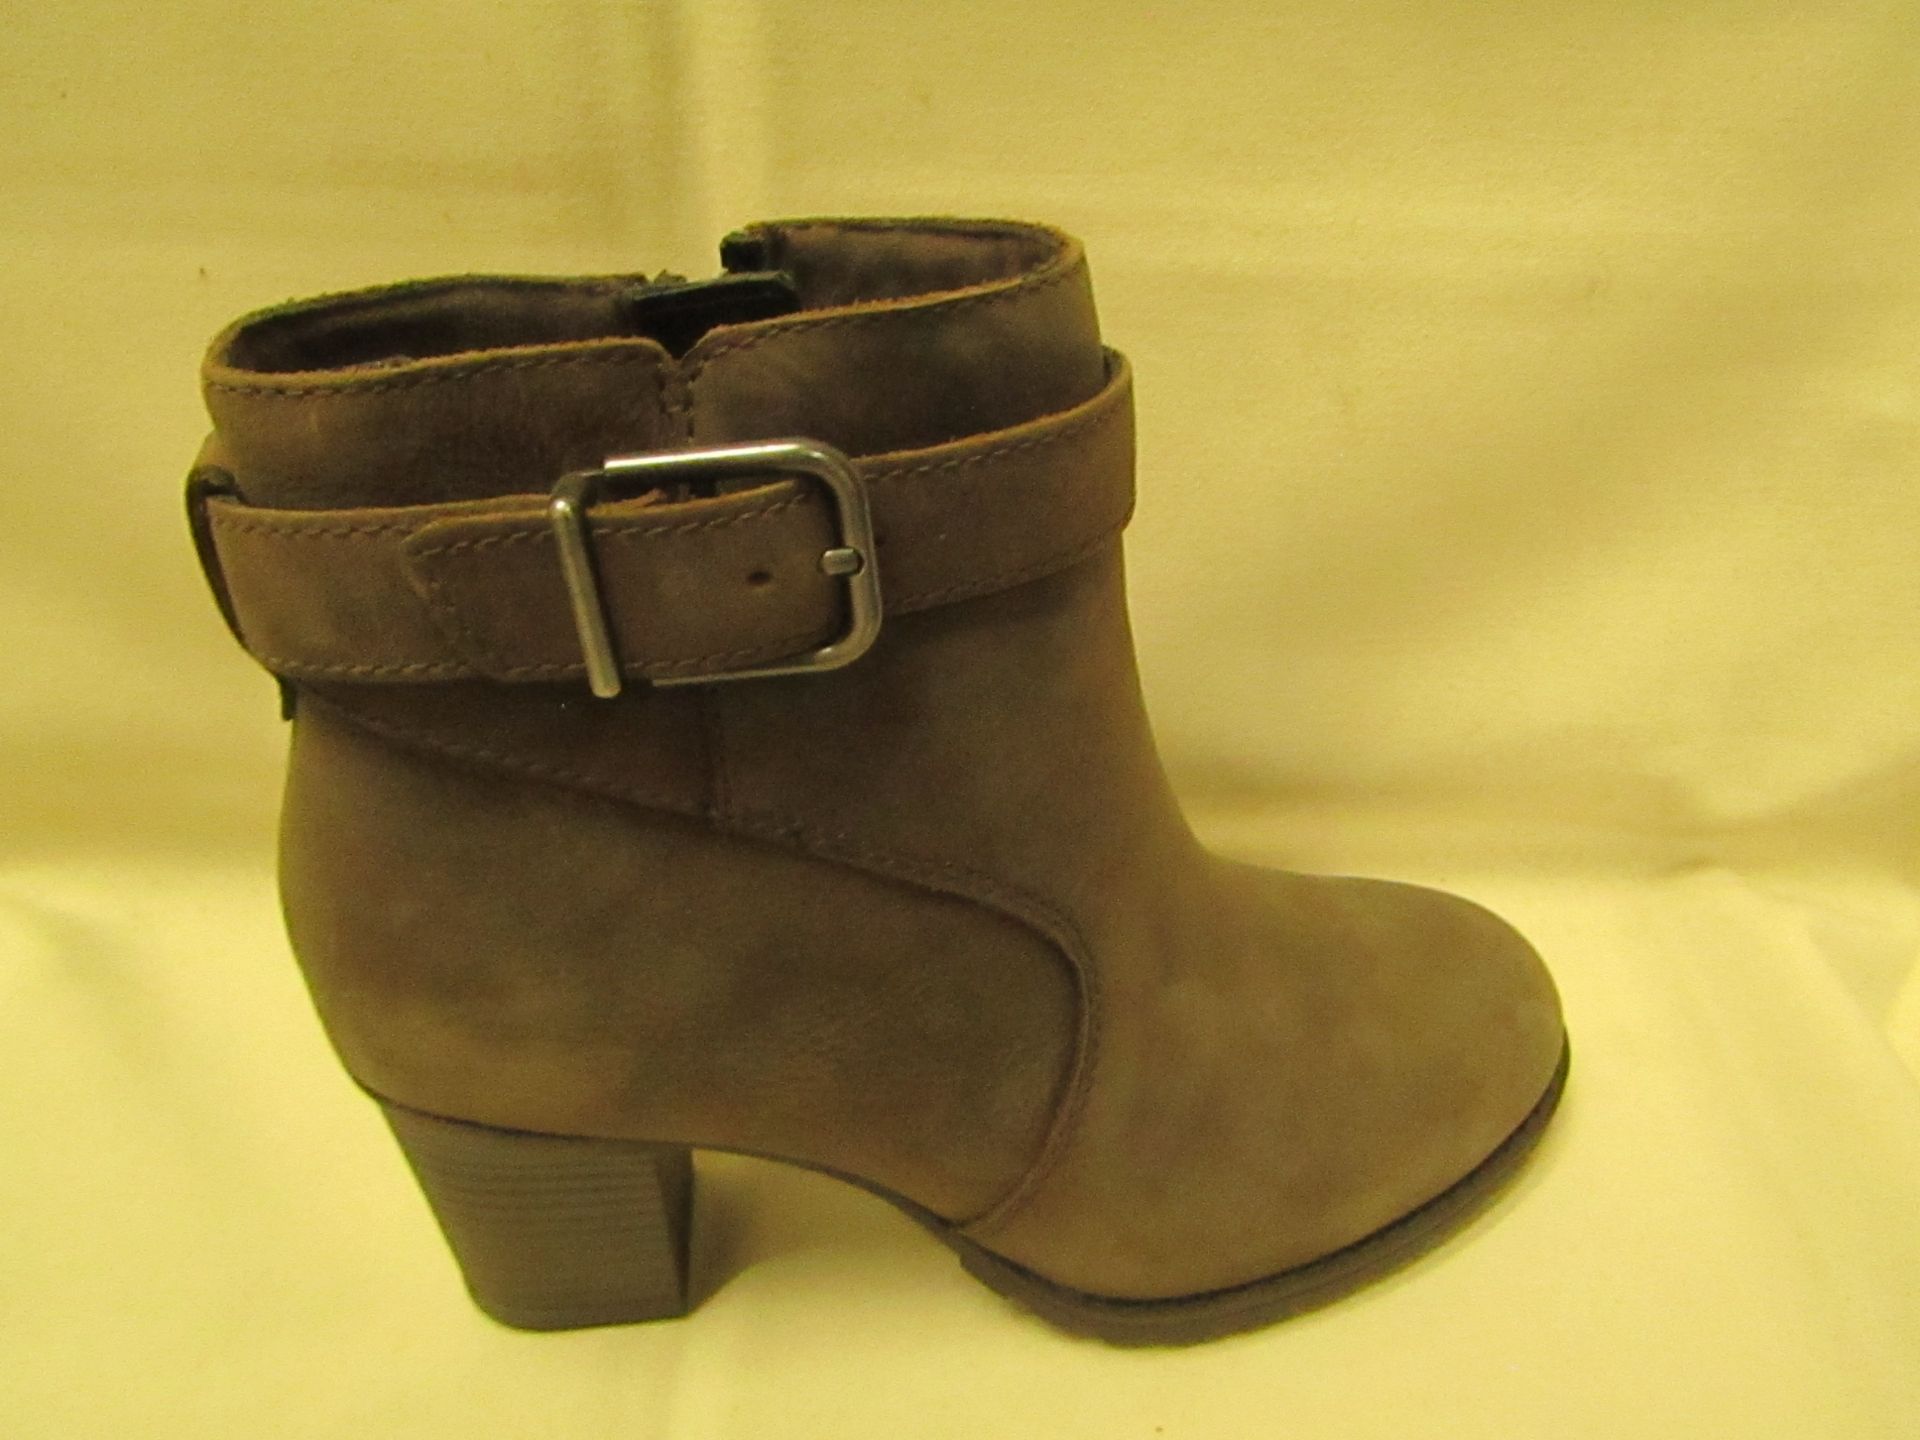 Clarke "s Collection Verona Lark Boots Brown Suede Size 3 New & Boxed